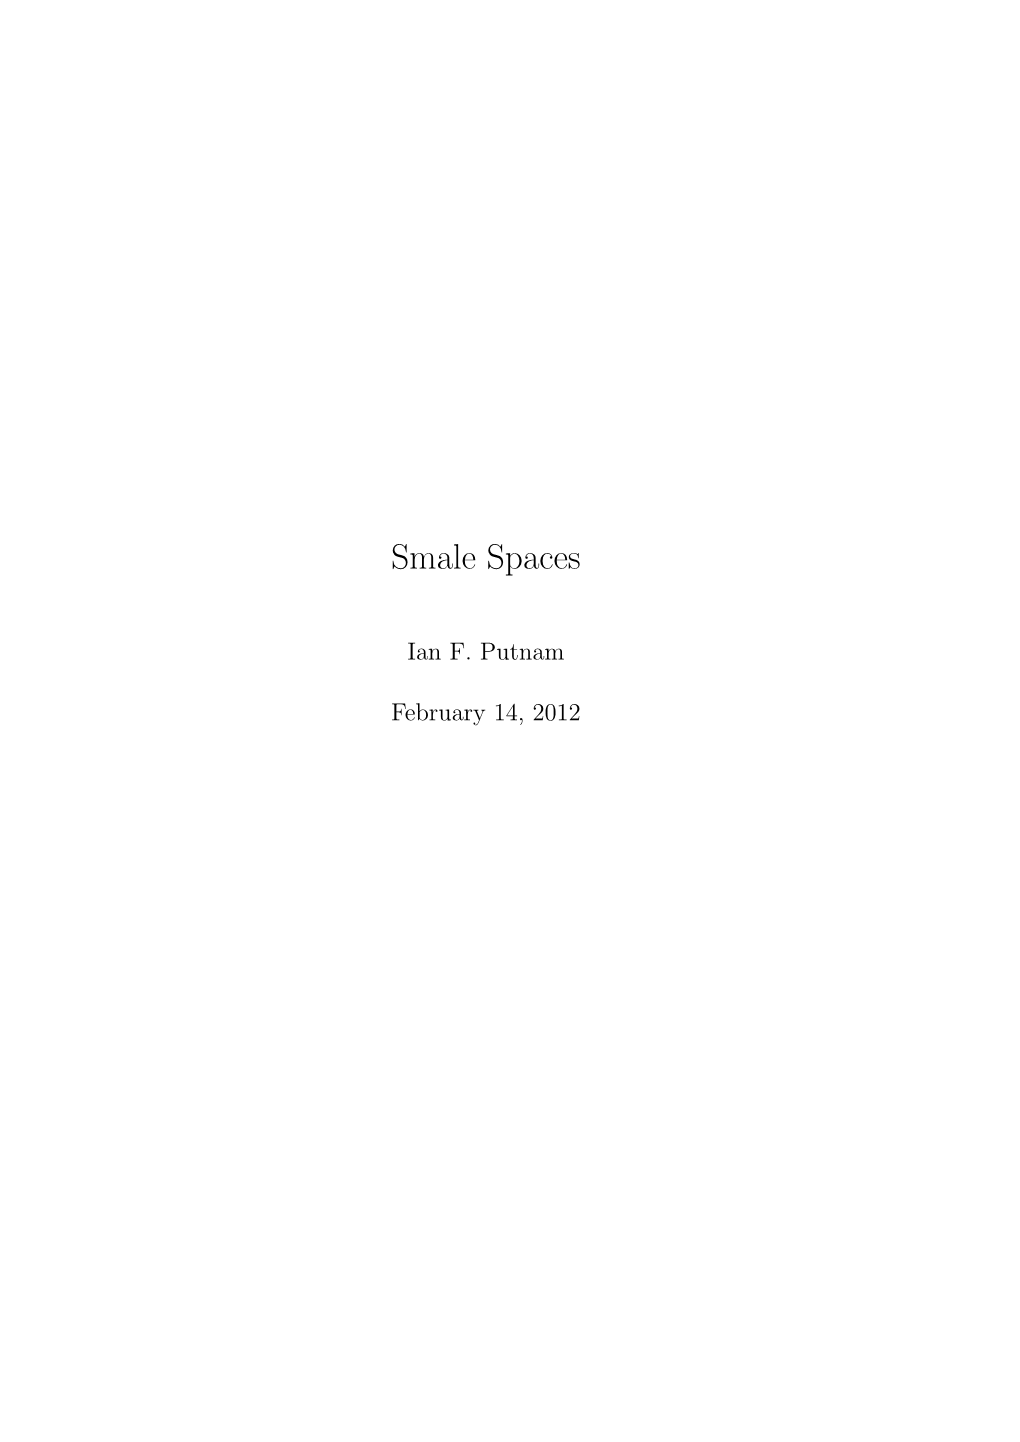 Smale Spaces